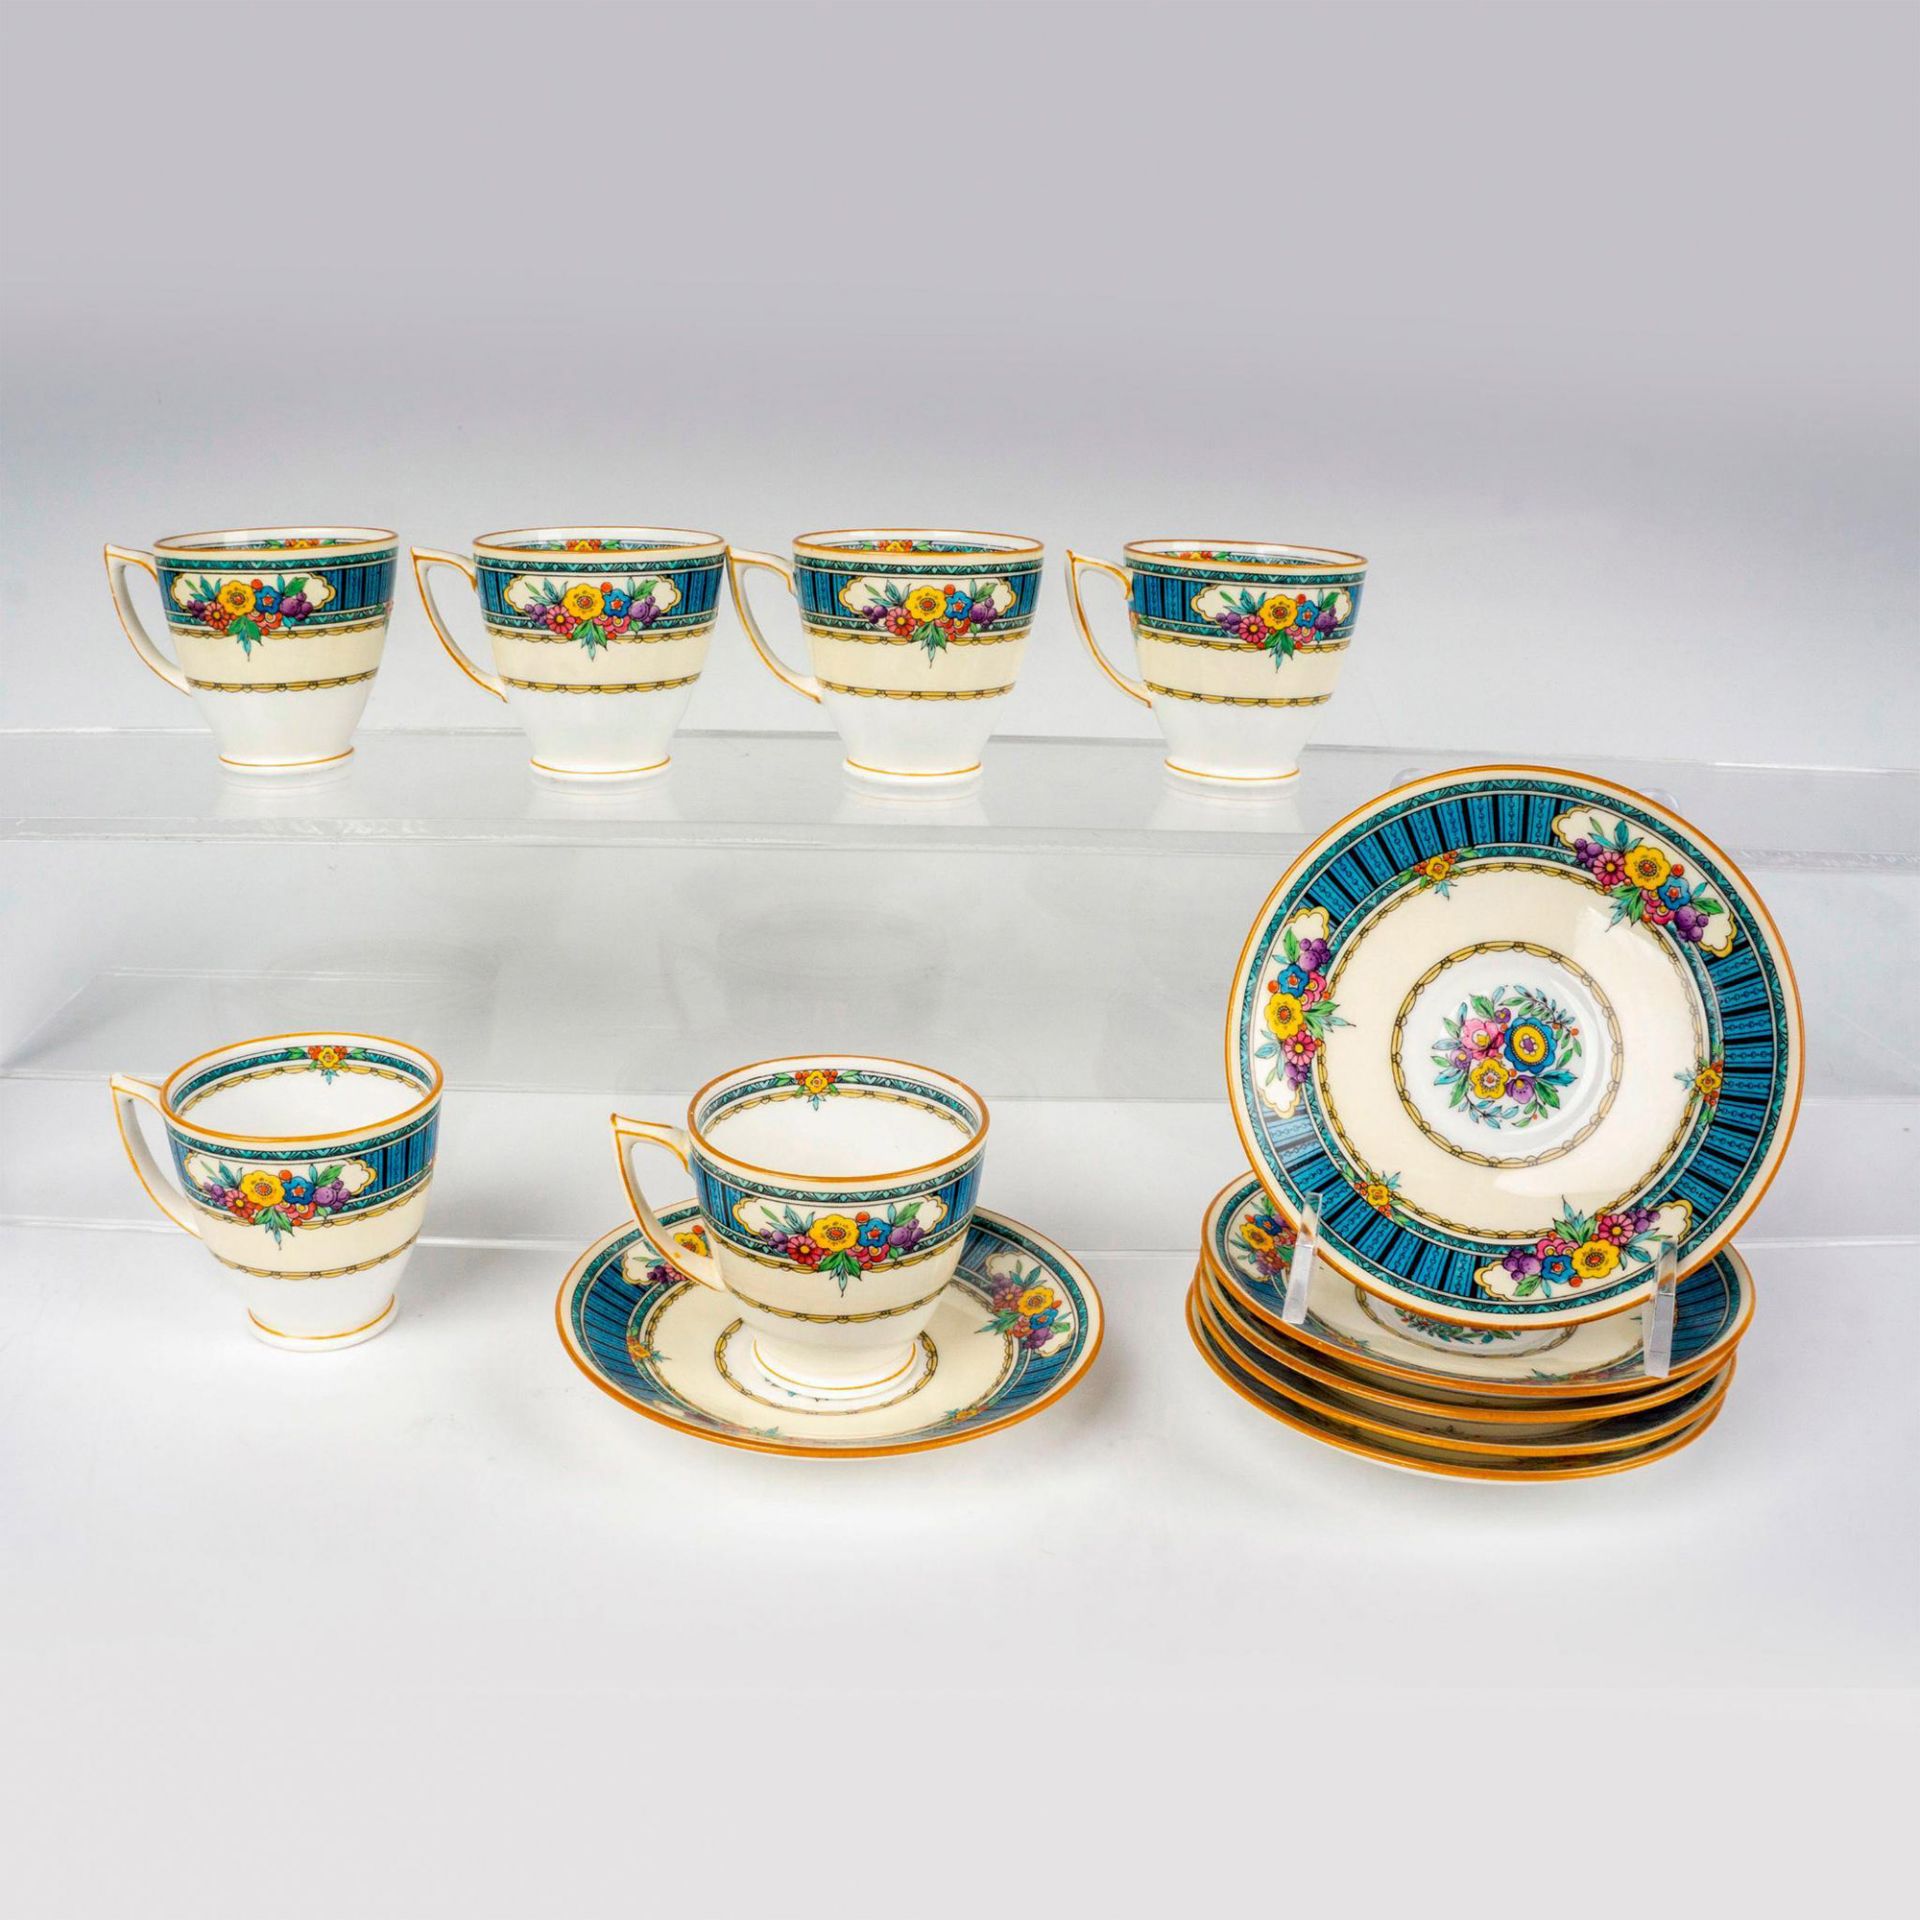 12pc Minton China Floral Demitasse Cups and Saucers - Image 2 of 3